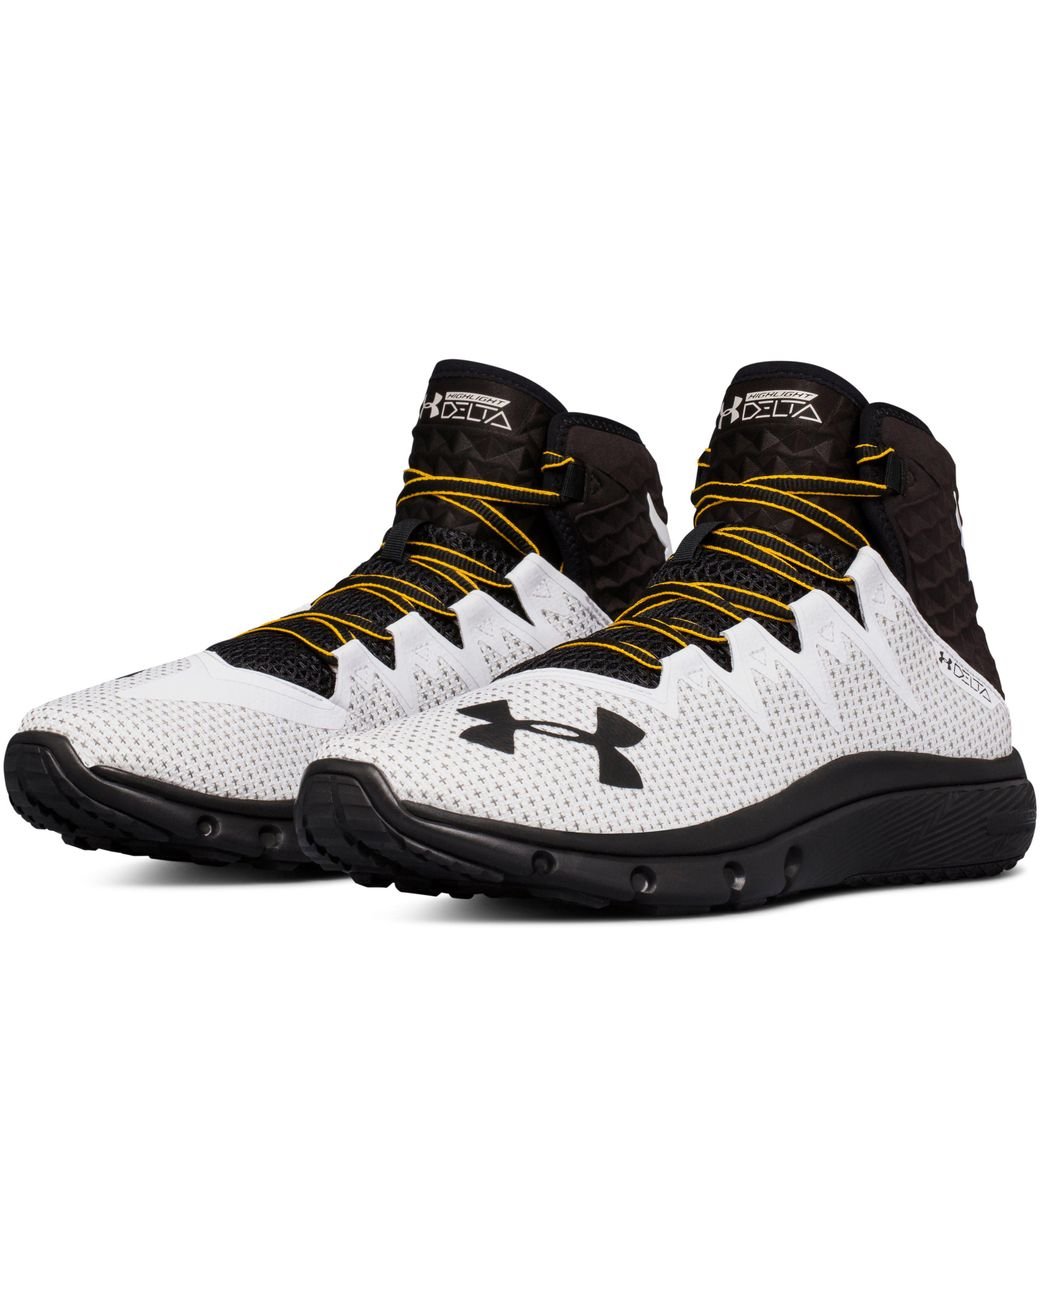 Under Armour Men's Ua Project Delta Training Shoes in Black for |